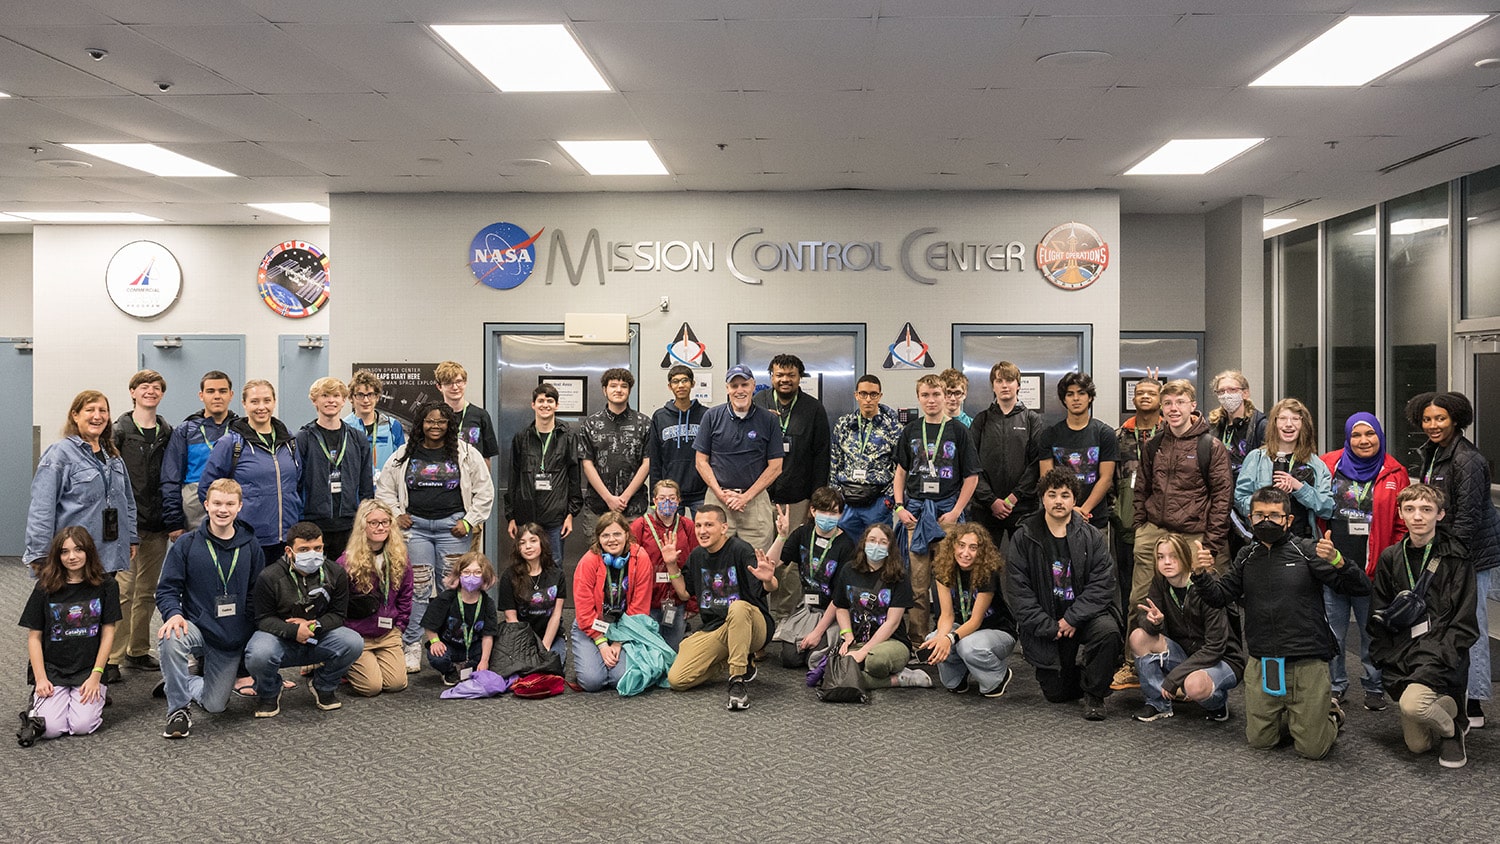 Catalyst students at NASA's Mission Control Center